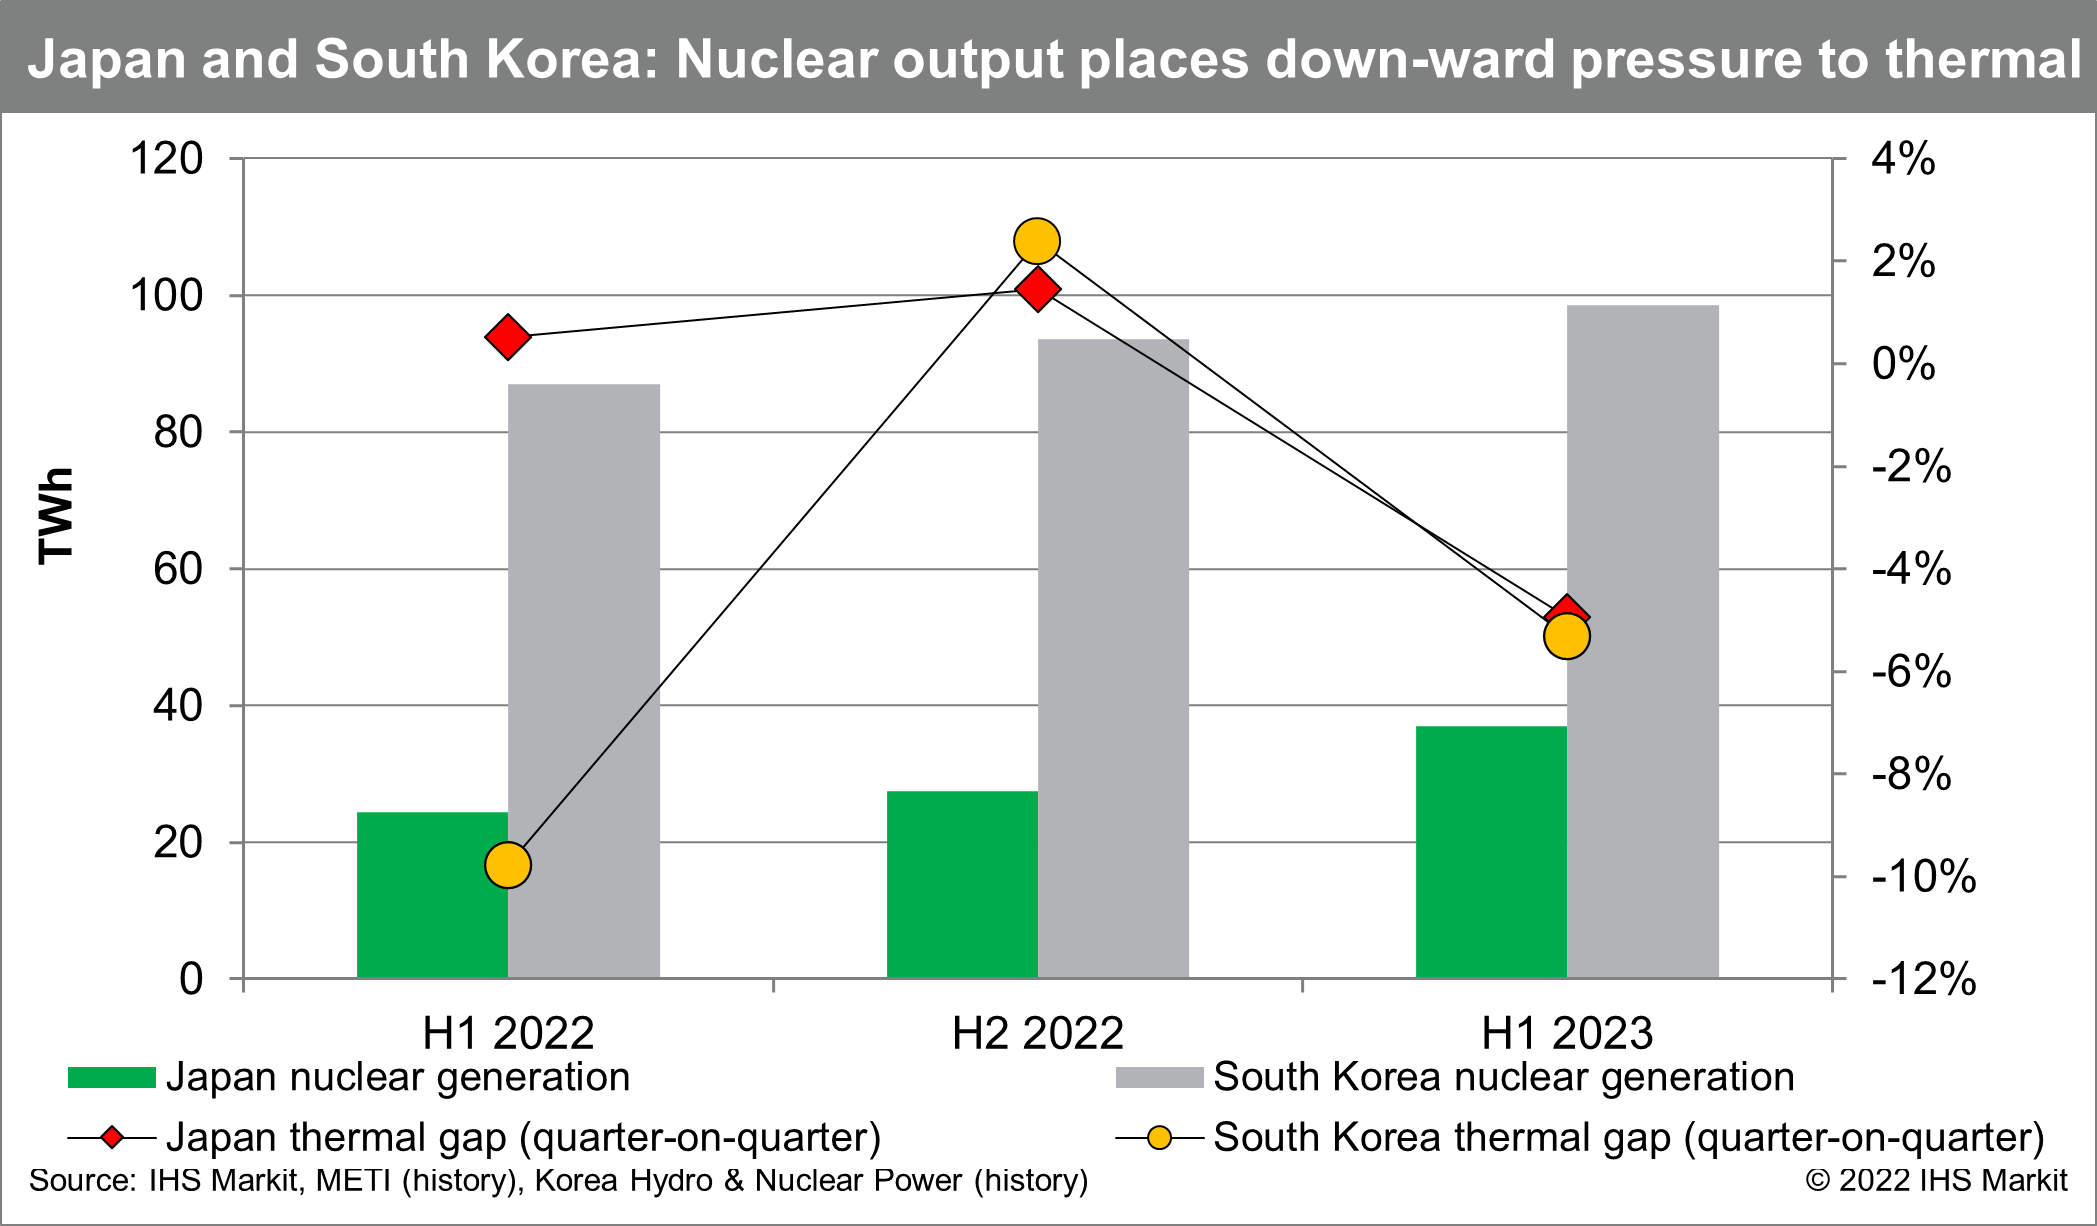 Japan and South Korea: Nuclear output places down-ward pressure to thermal